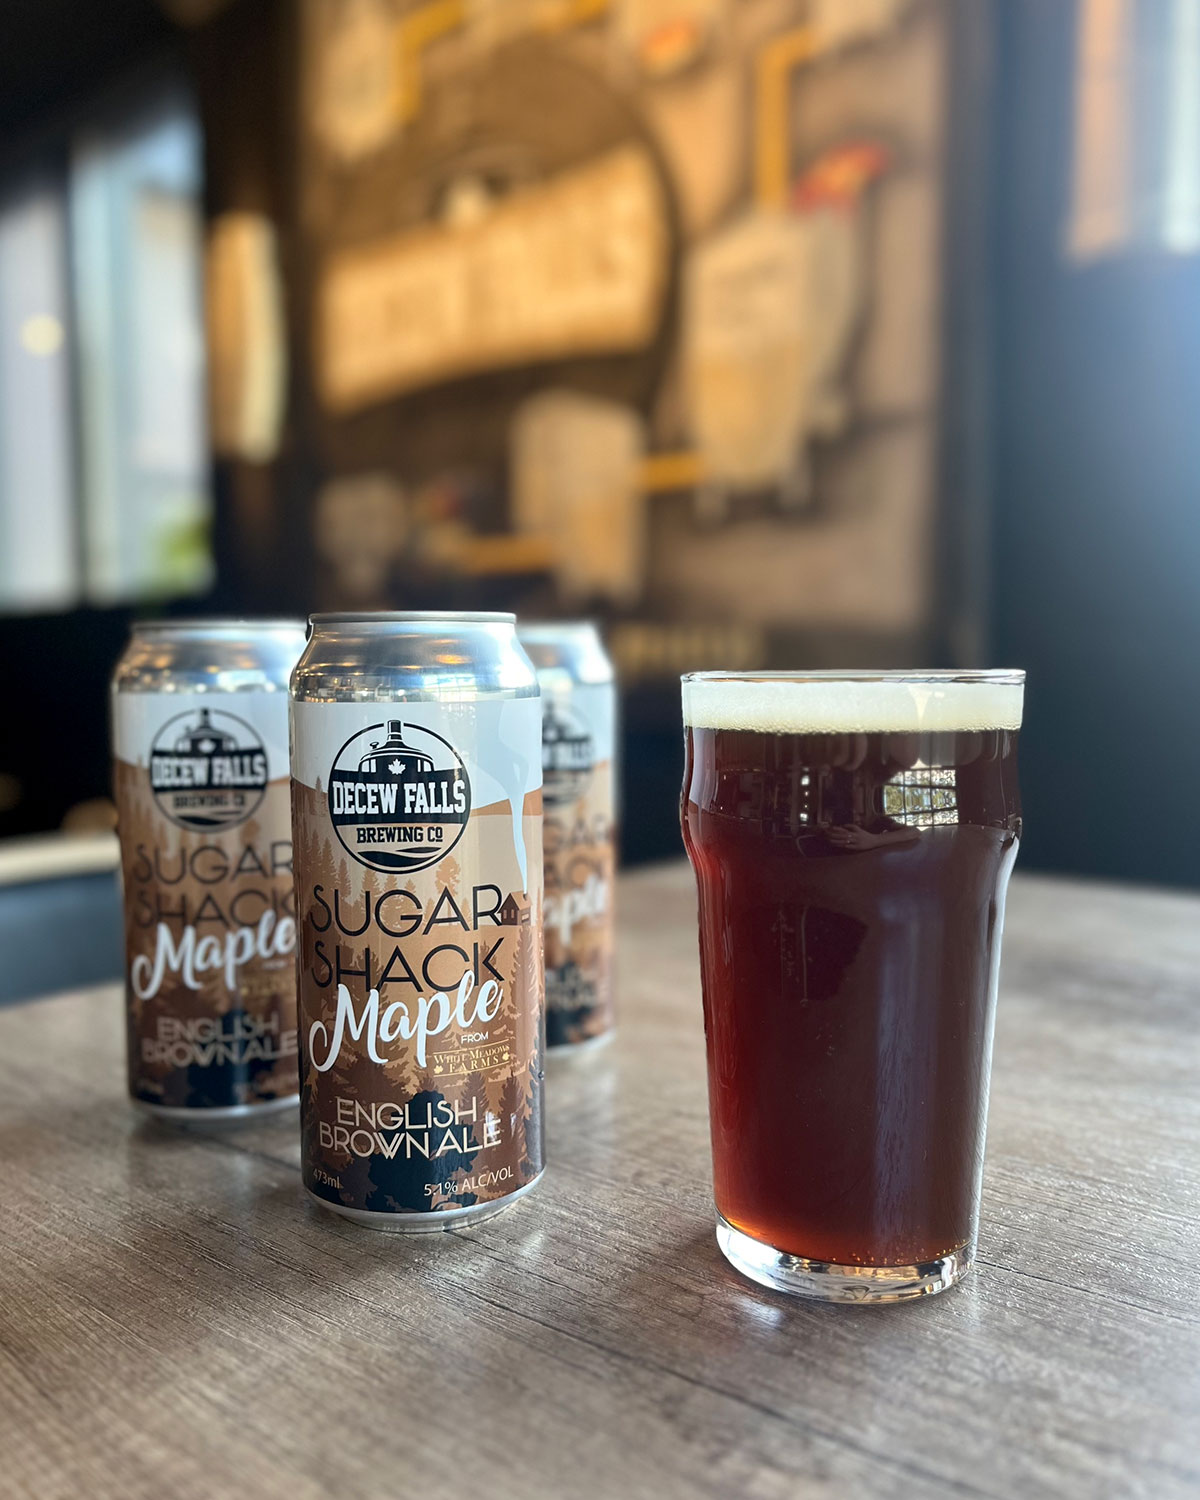 Discover unique tastes such as the Sugar Shack Maple English Brown Ale.